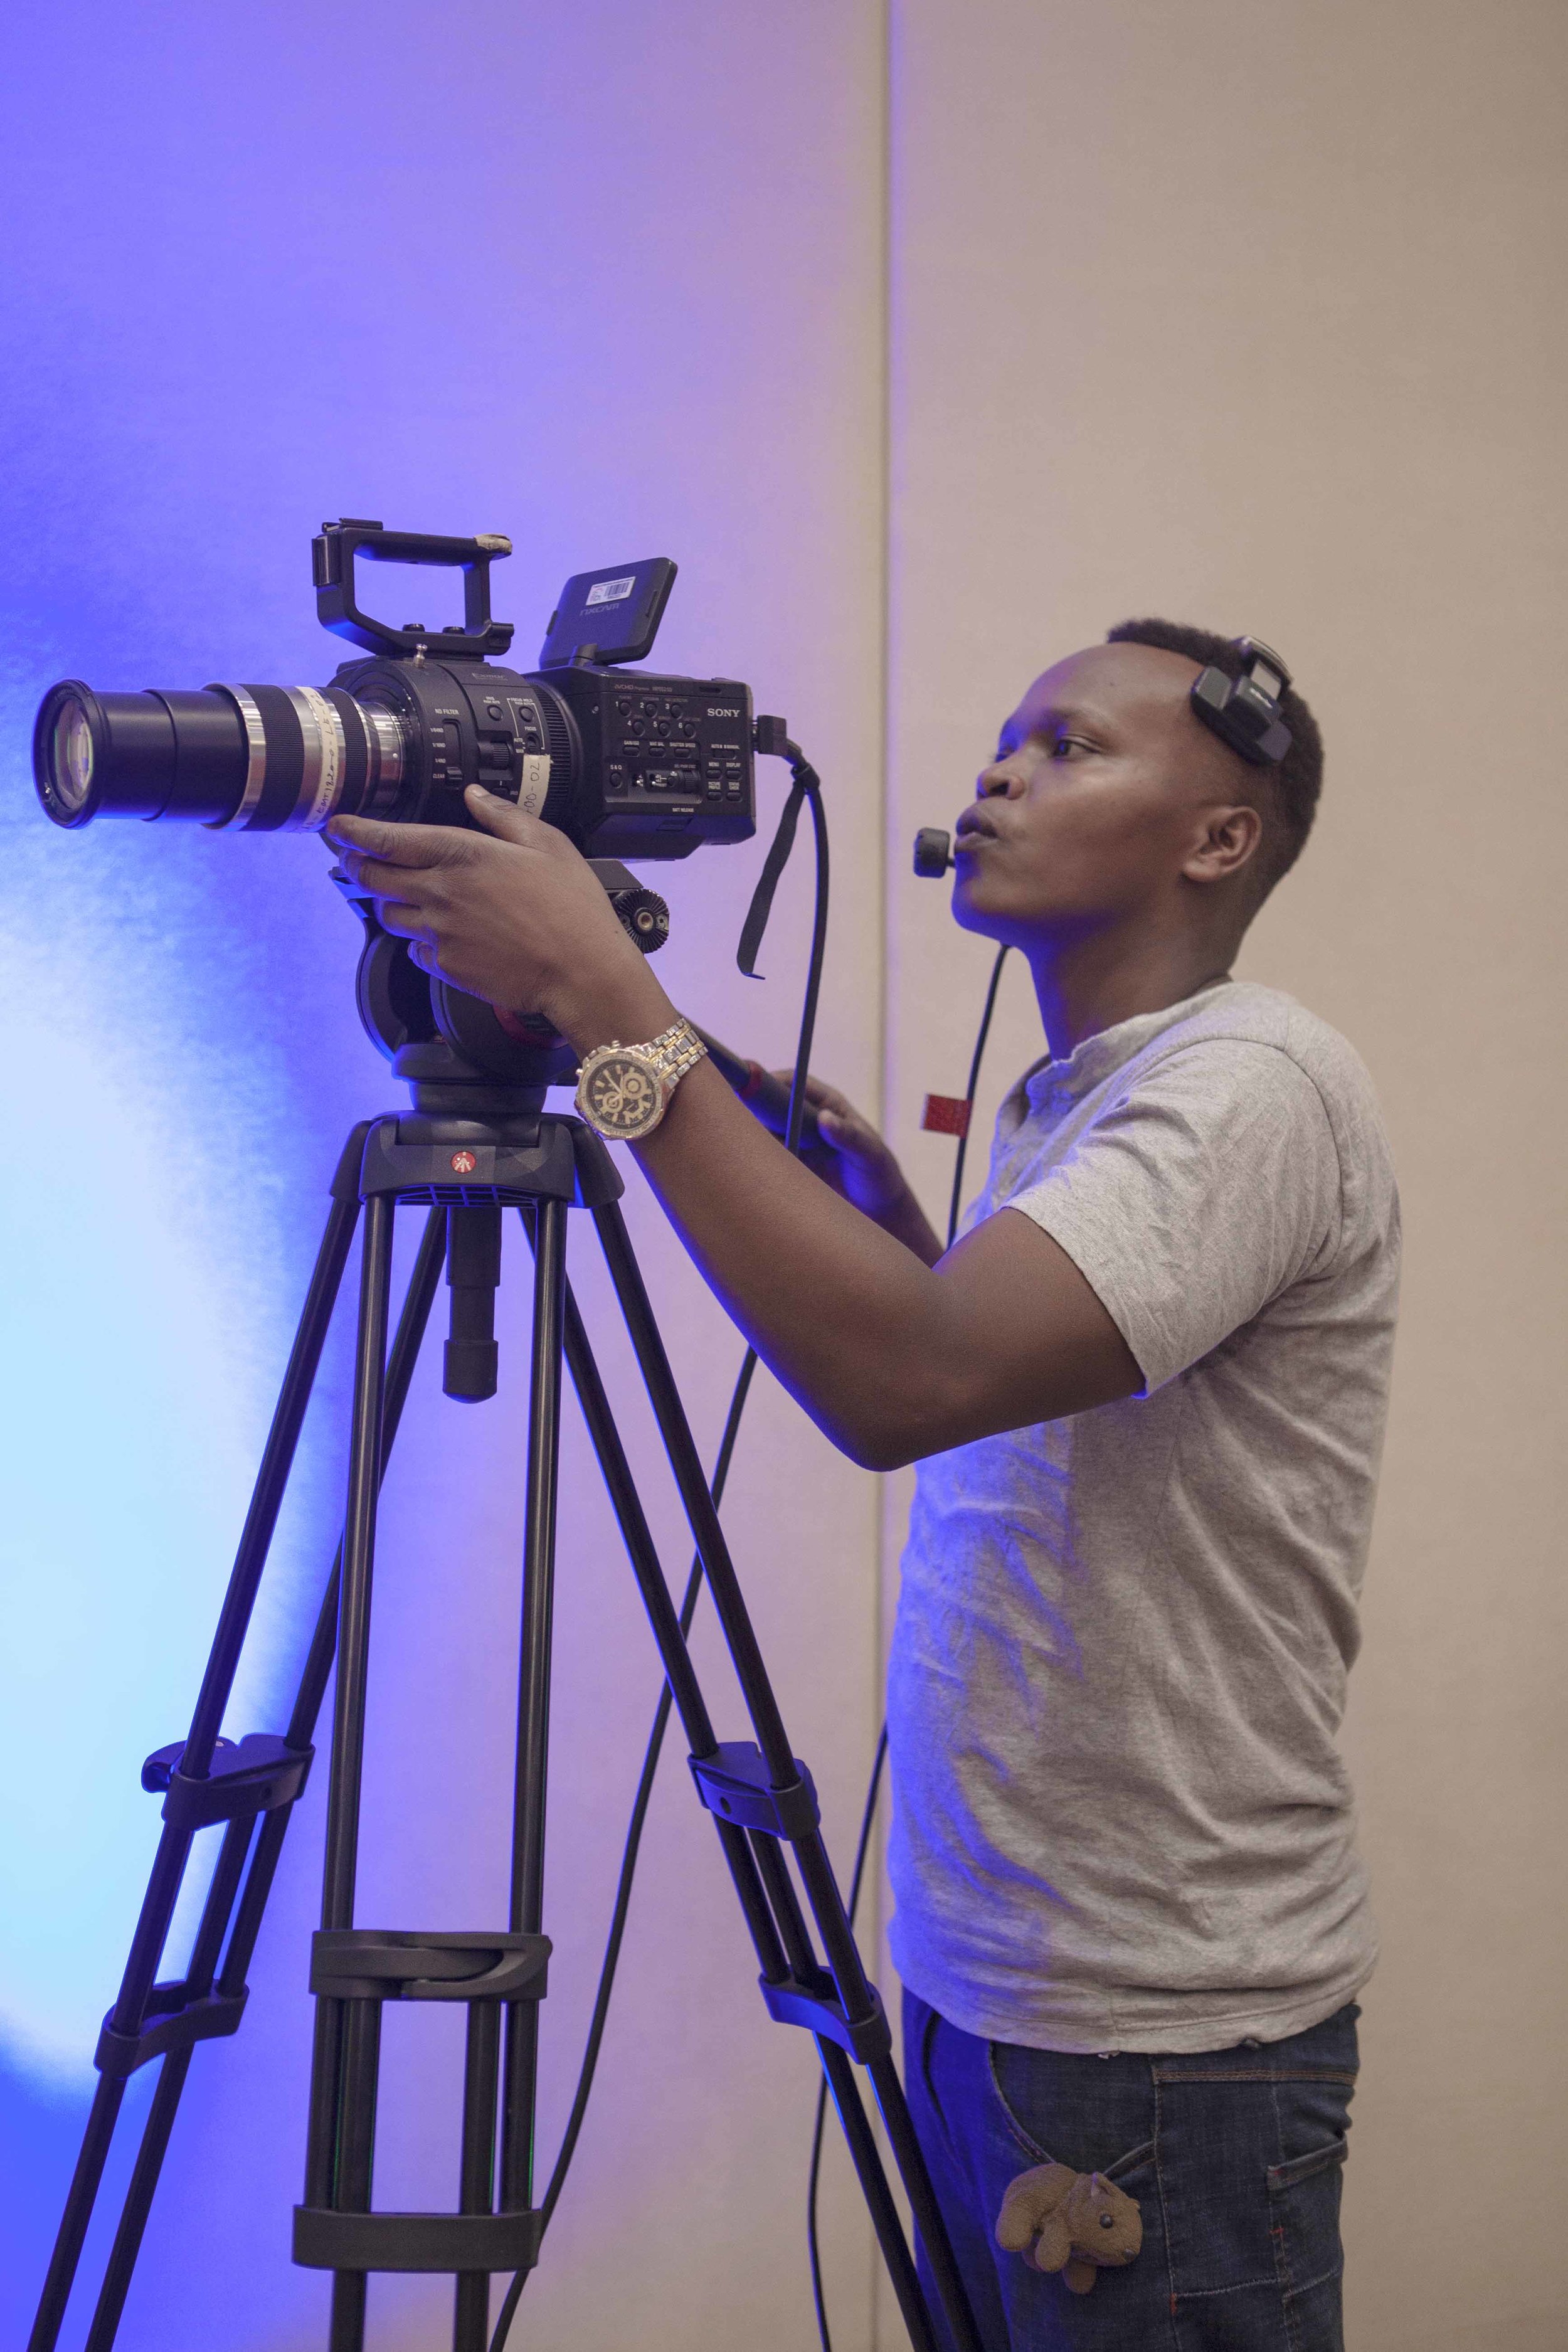 Yves, one of ADMA students setting up the Sony FS700